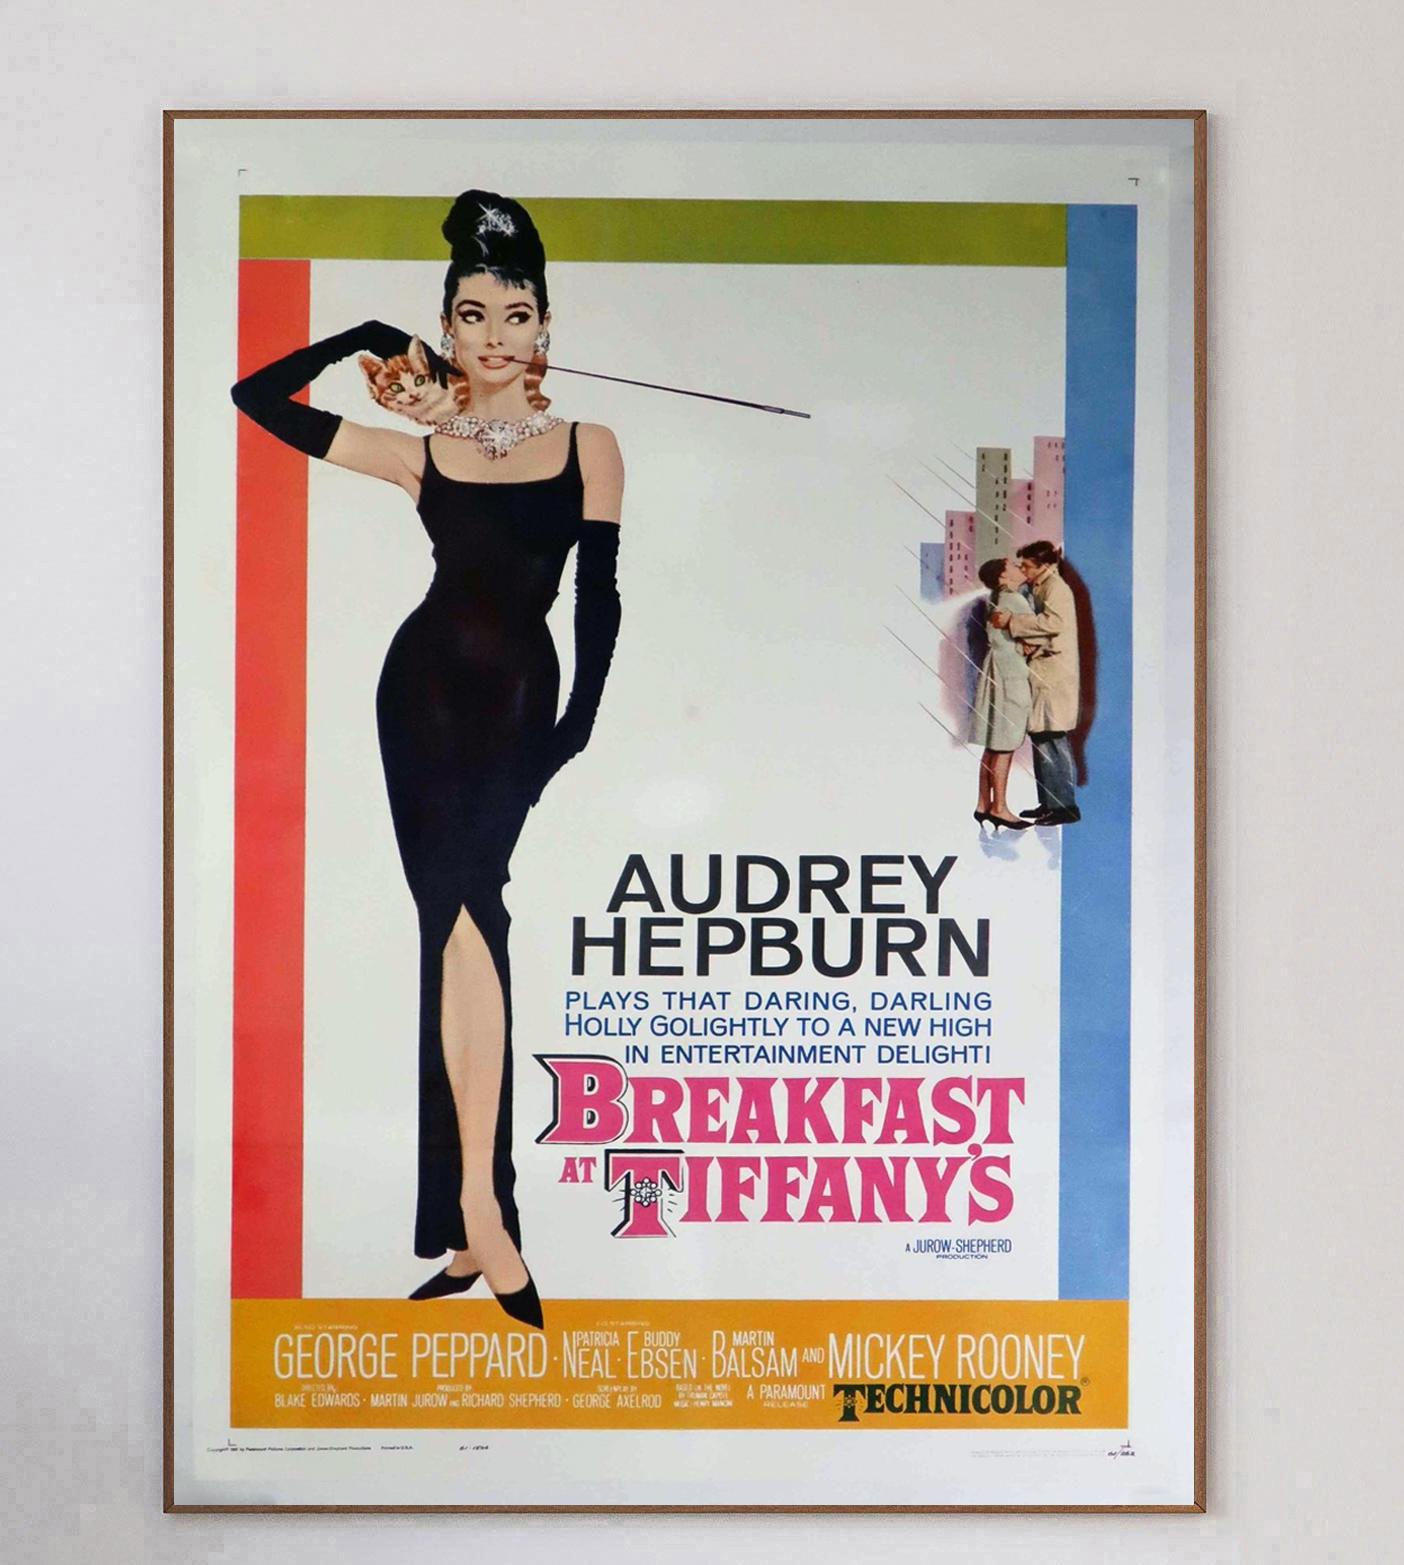 Truly one of the most iconic poster designs of all time, this 1961 poster for Blake Edwards' romantic comedy 